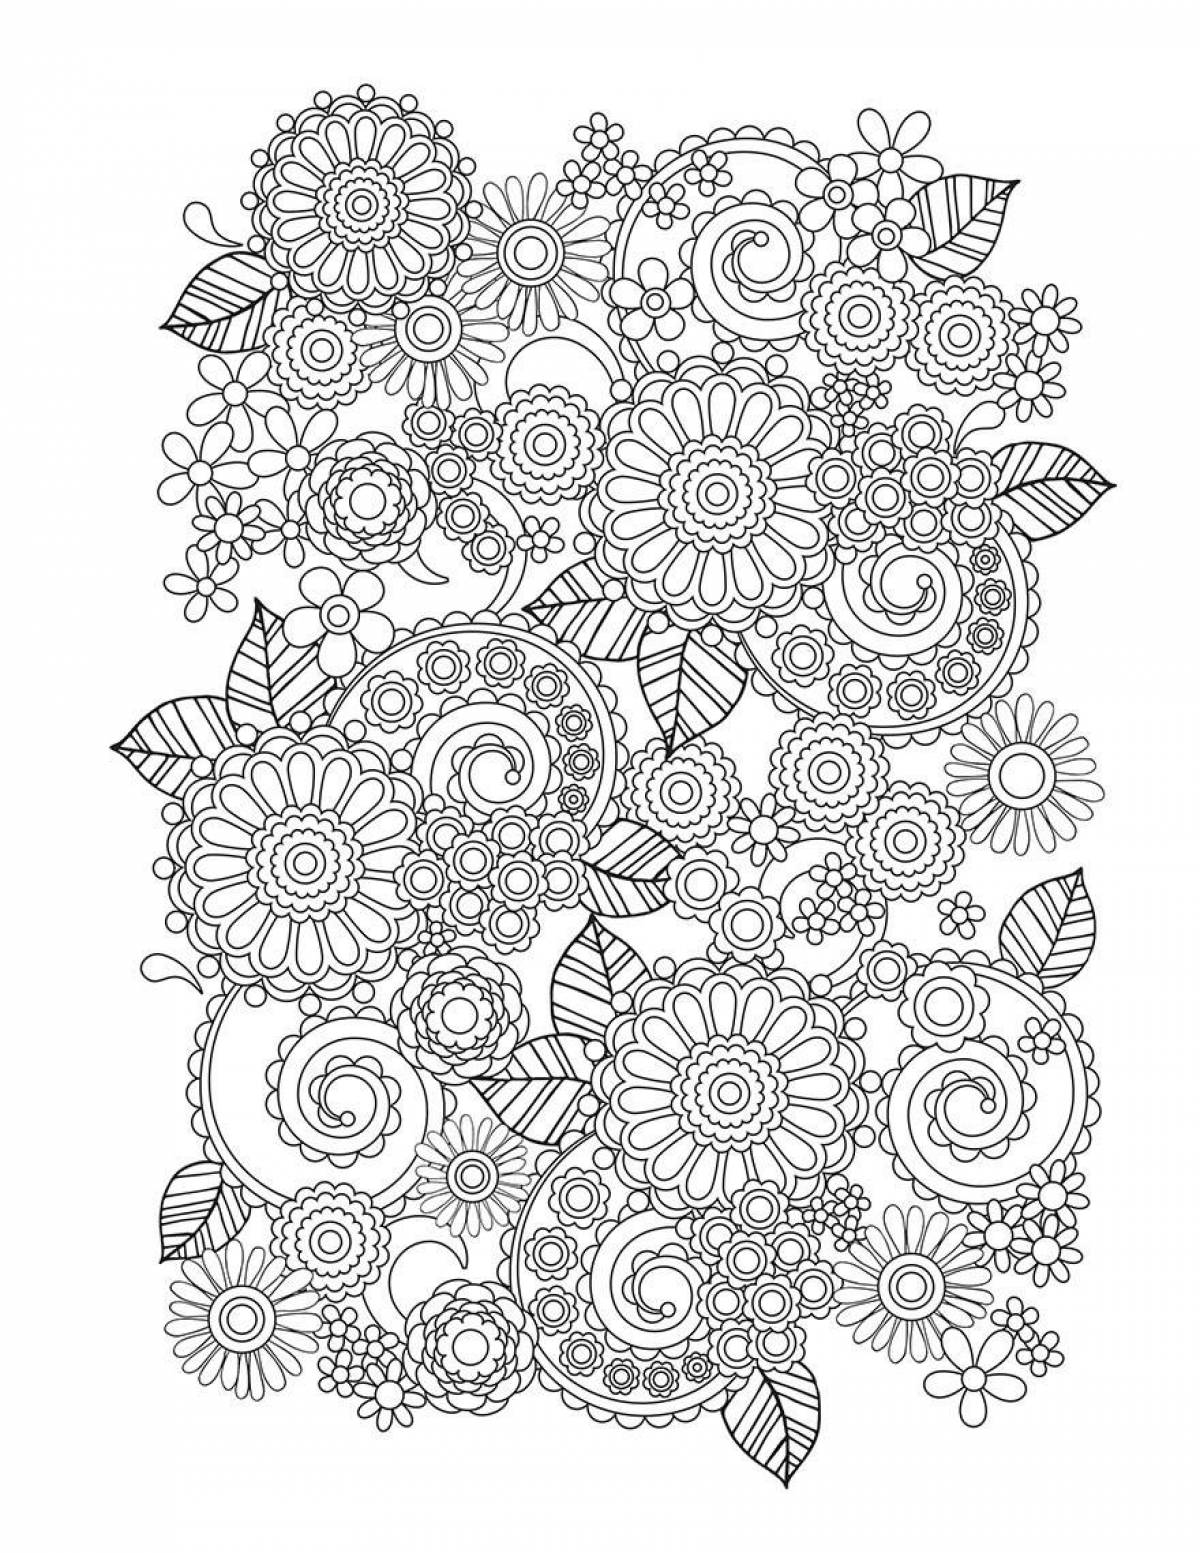 Color themed coloring book, small